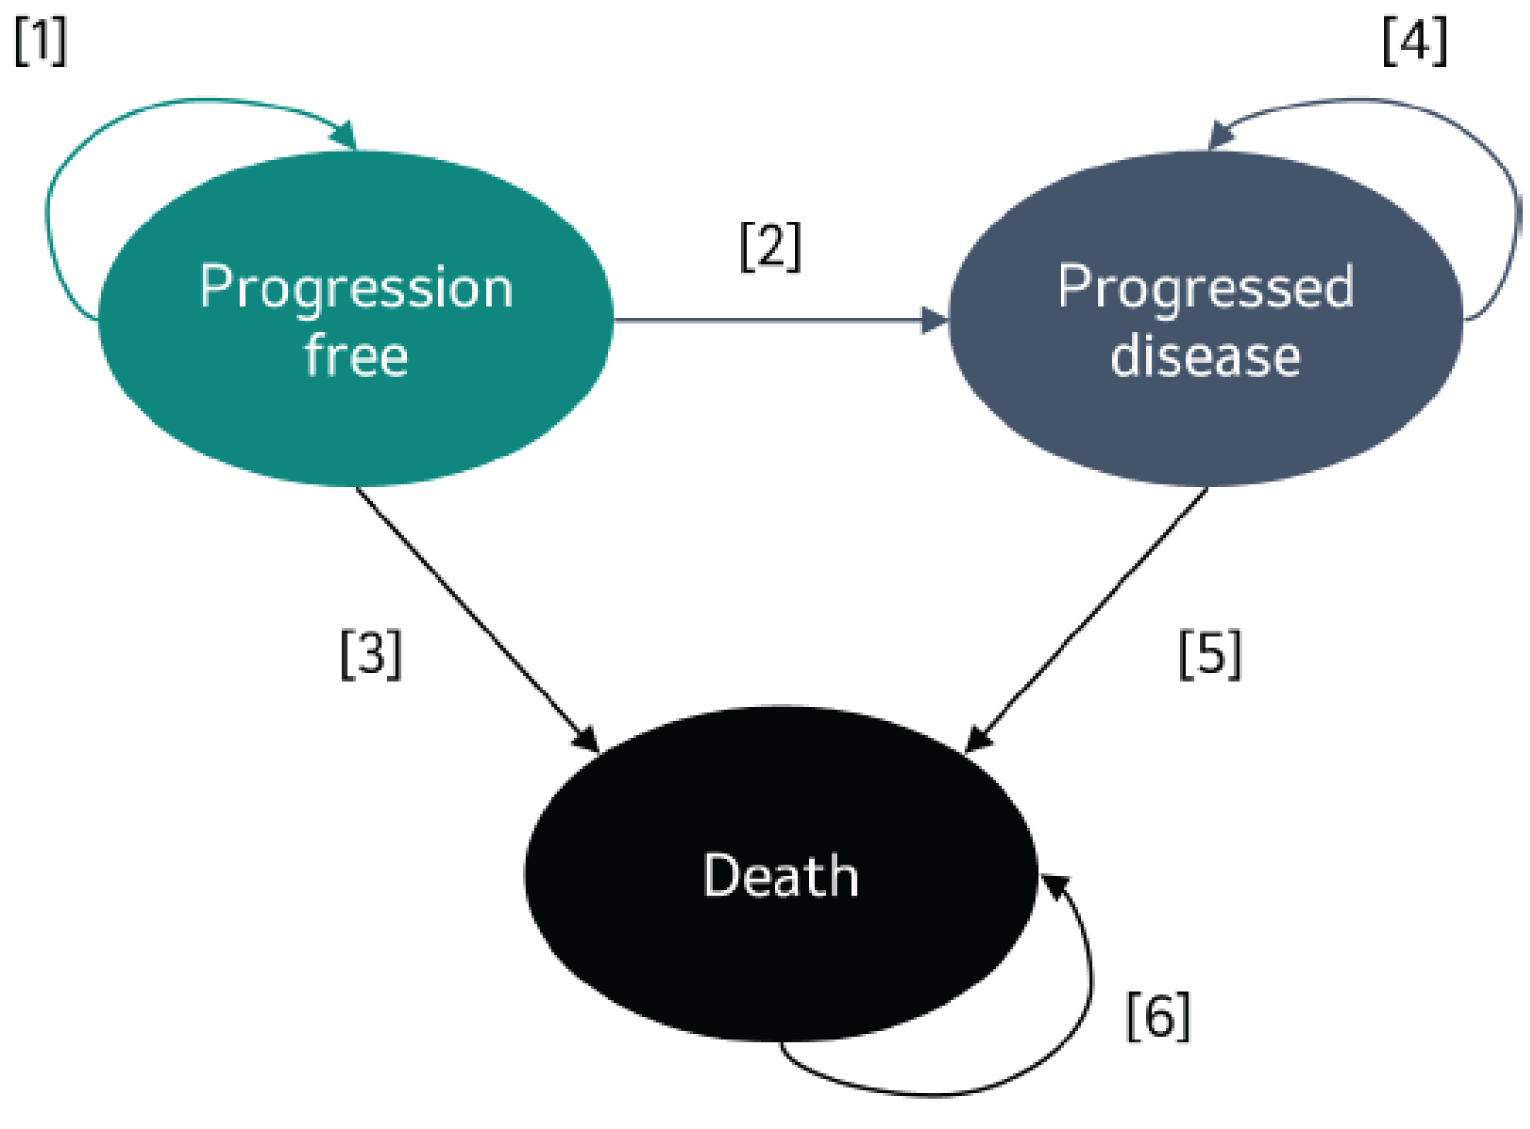 A diagram of a partitioned survival model with 3 health states: “progression free,” “progressed disease,” and “death.” Arrows connect each state to the others.